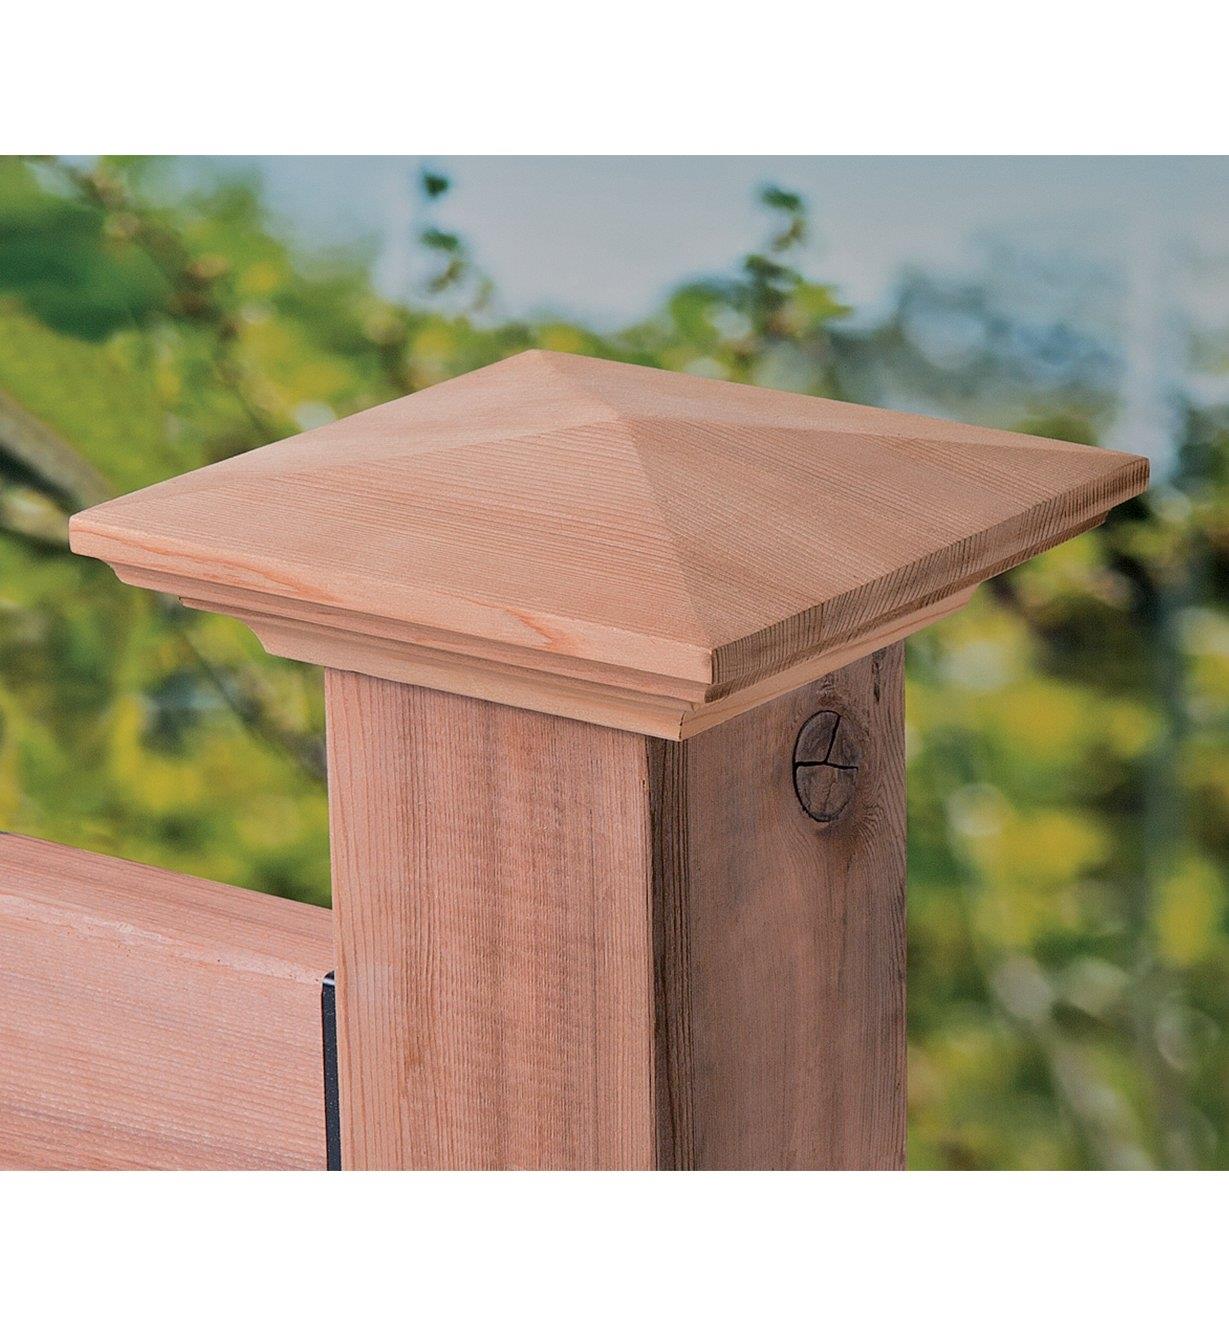 Wooden post cap installed on a deck post